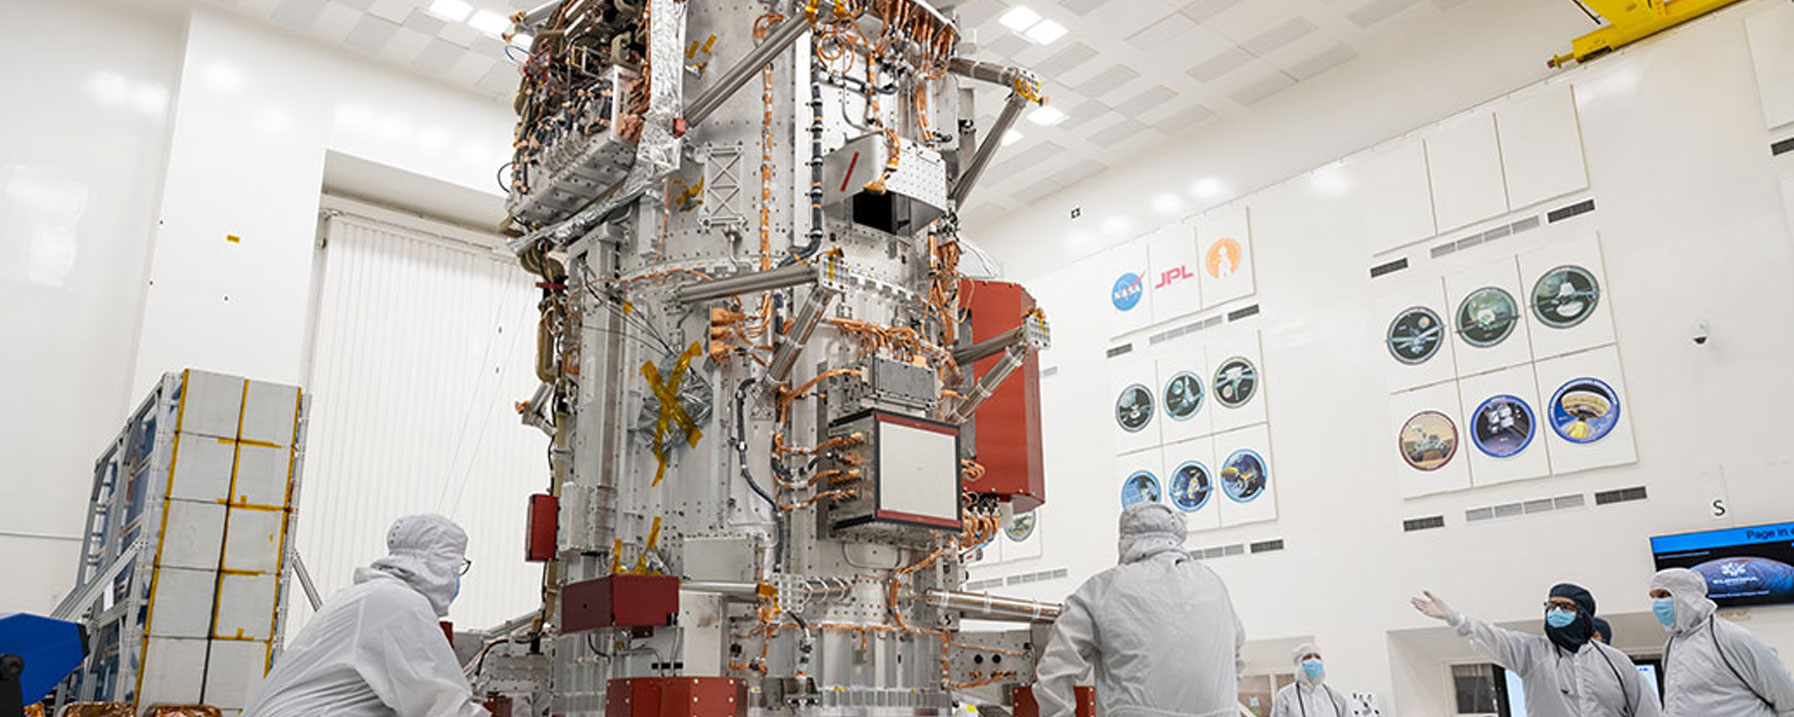 Standing 10 feet (3 meters) high, the core of NASA’s Europa Clipper will be the focus of attention in High Bay 1 of JPL’s storied Spacecraft Assembly Facility, as engineers and technicians assemble the spacecraft for a 2024 launch.